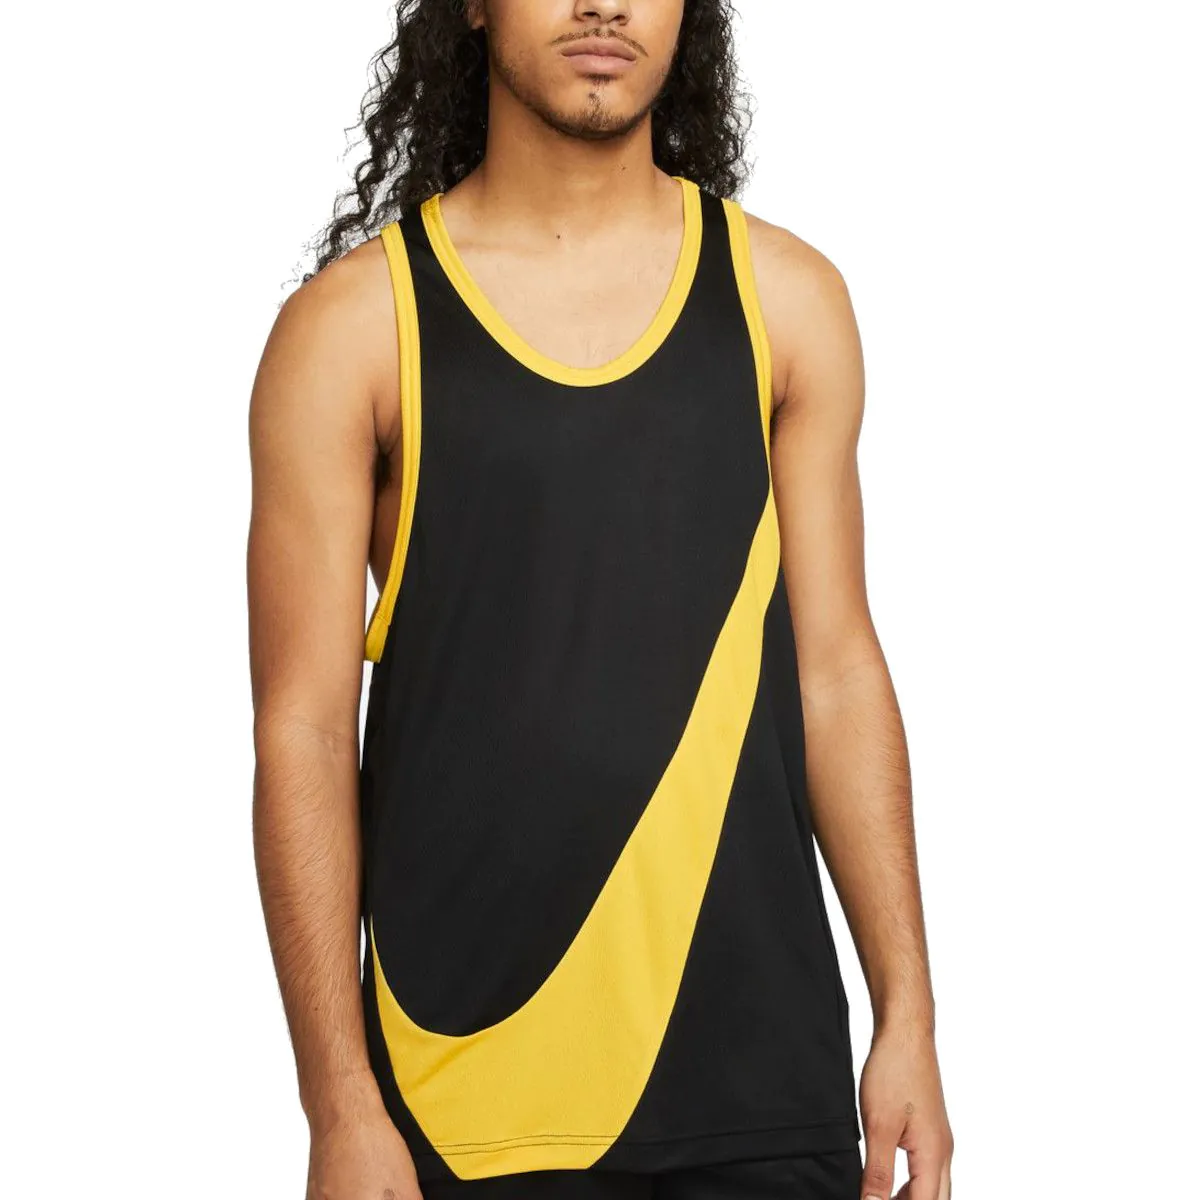 Nike Dri-FIT Men's Basketball Crossover Jersey DH7132-010